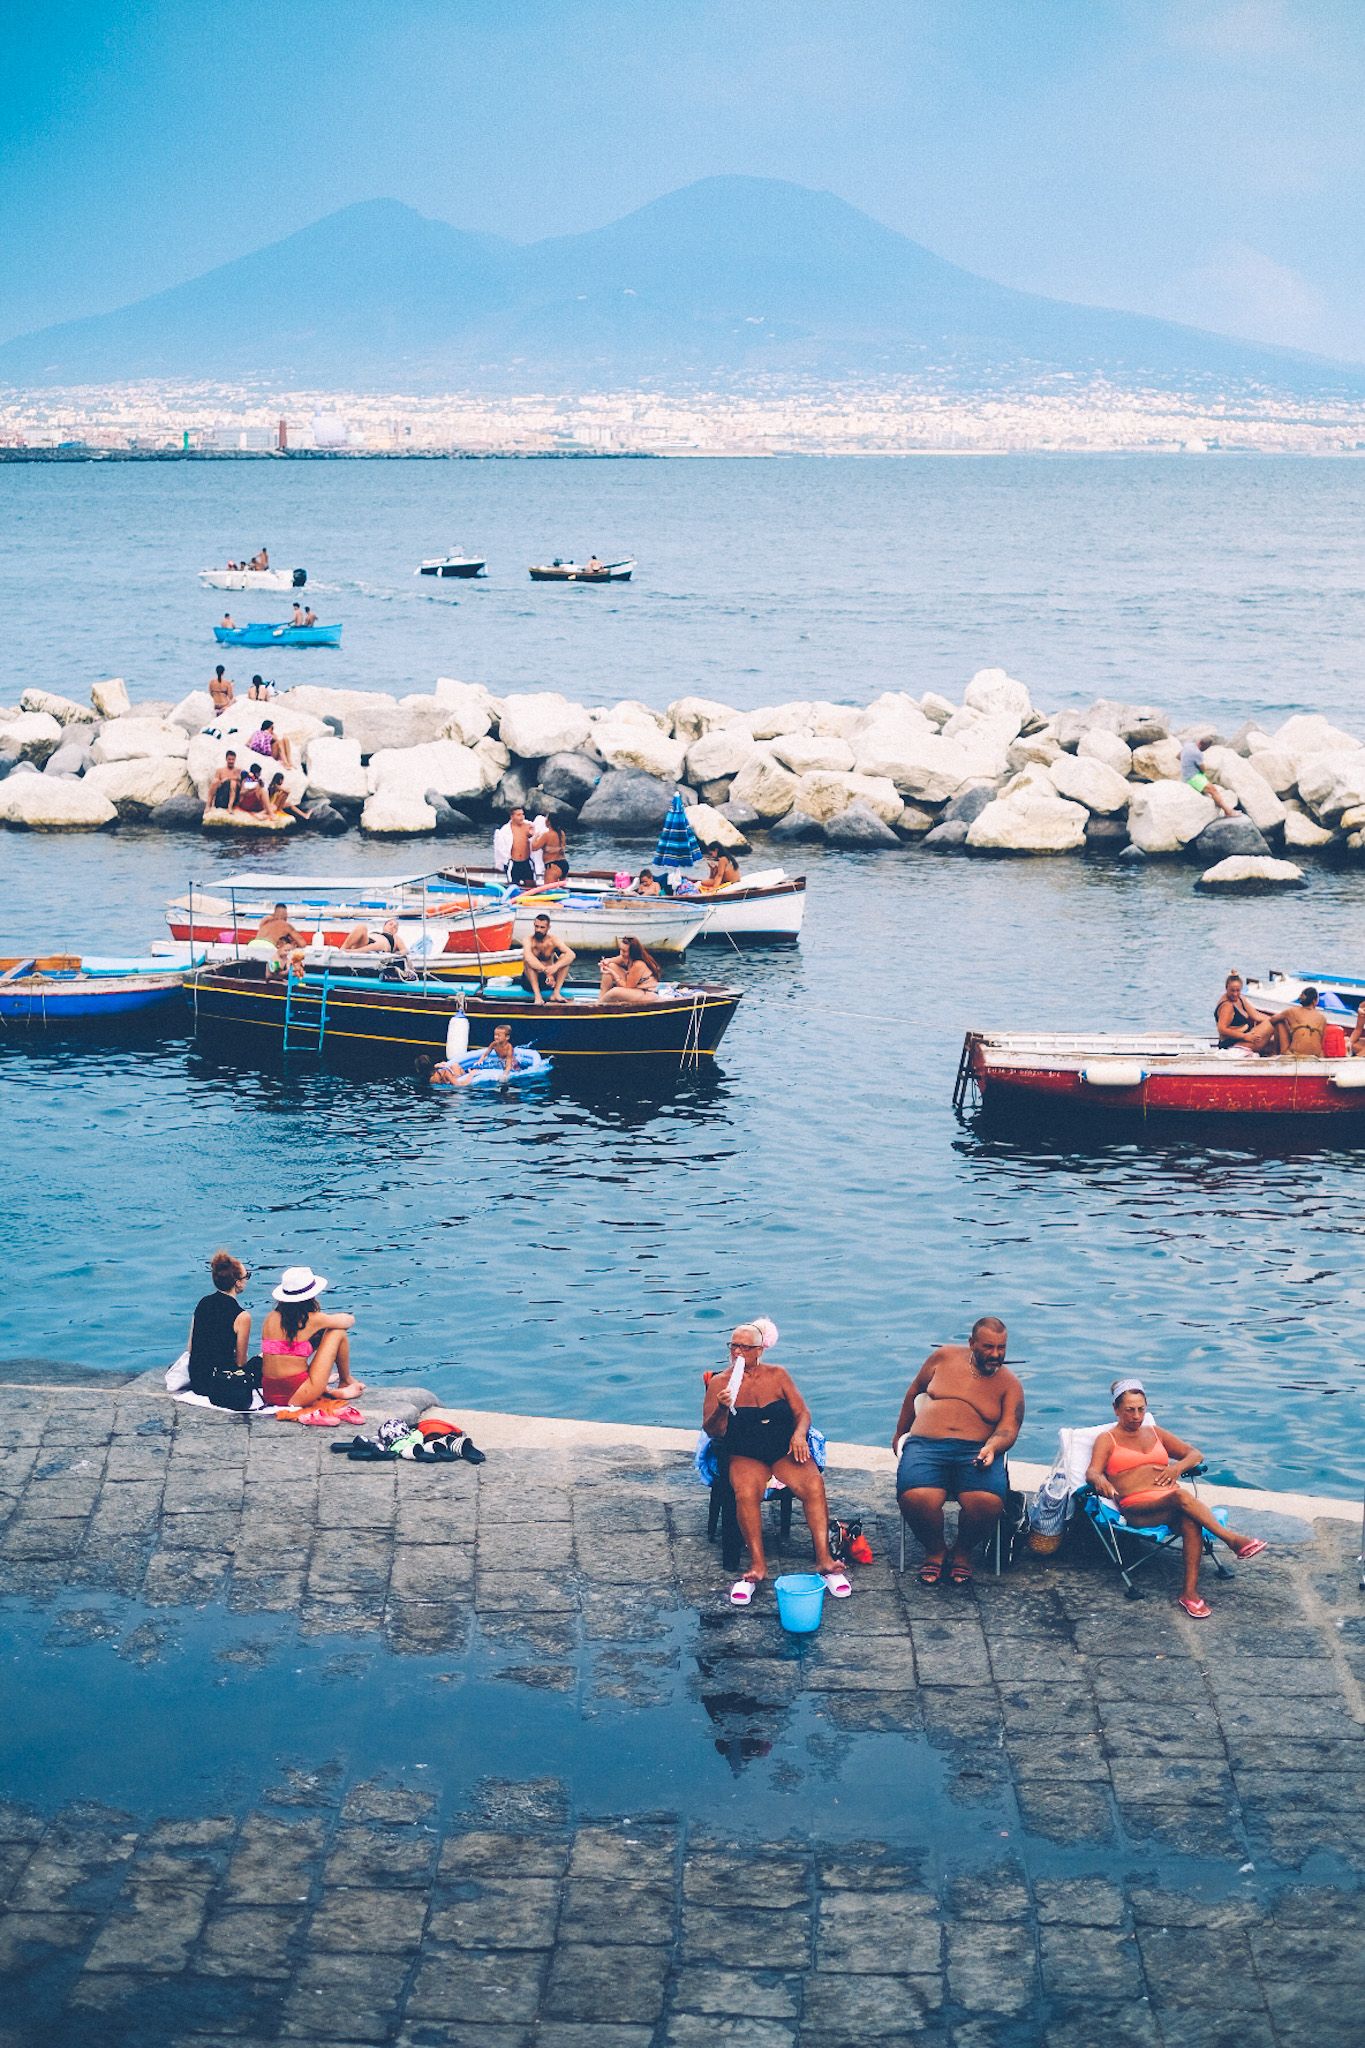 People sit on the pier of Napoli, boats in the water and Mount Vesuvius in the background, faint.